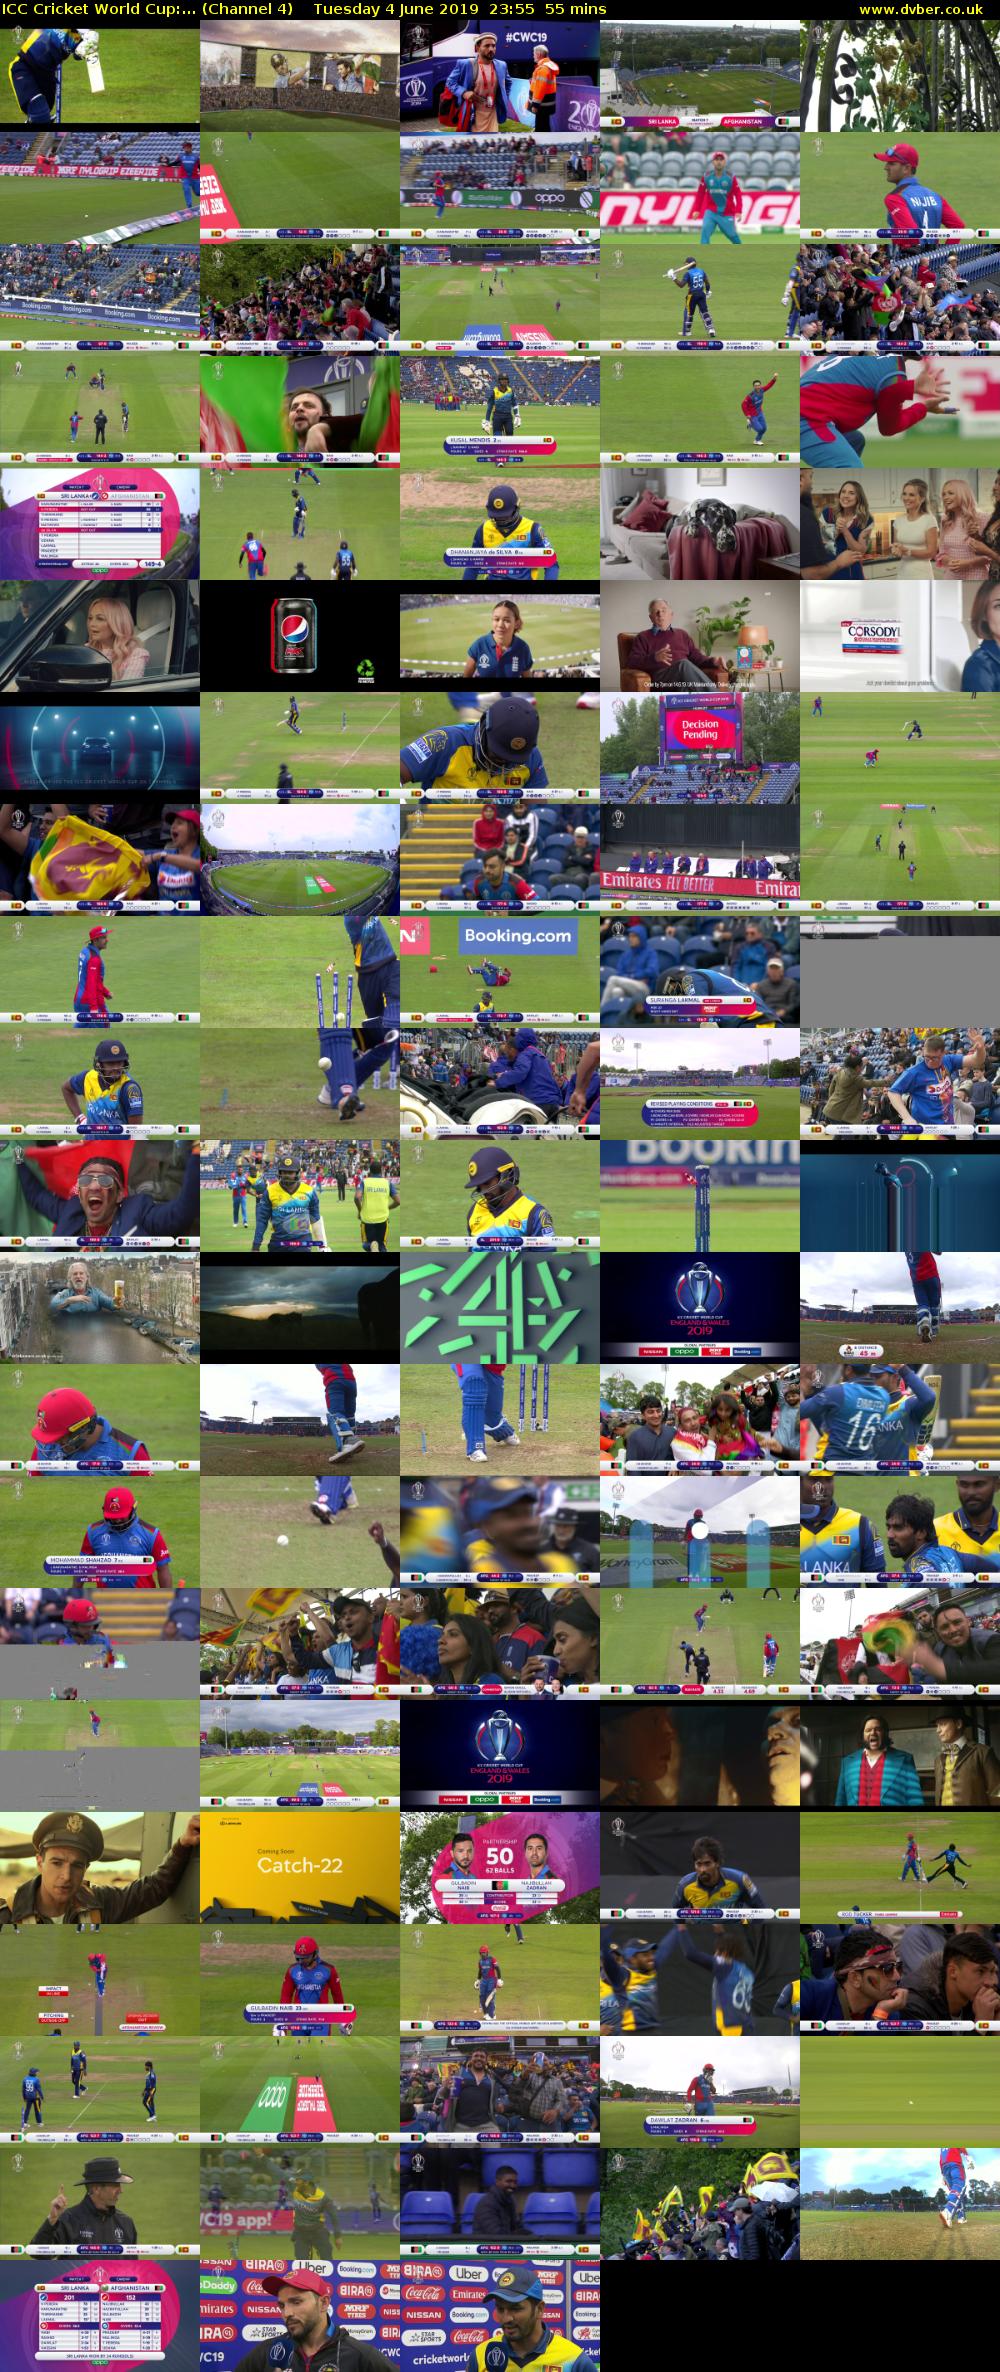 ICC Cricket World Cup:... (Channel 4) Tuesday 4 June 2019 23:55 - 00:50